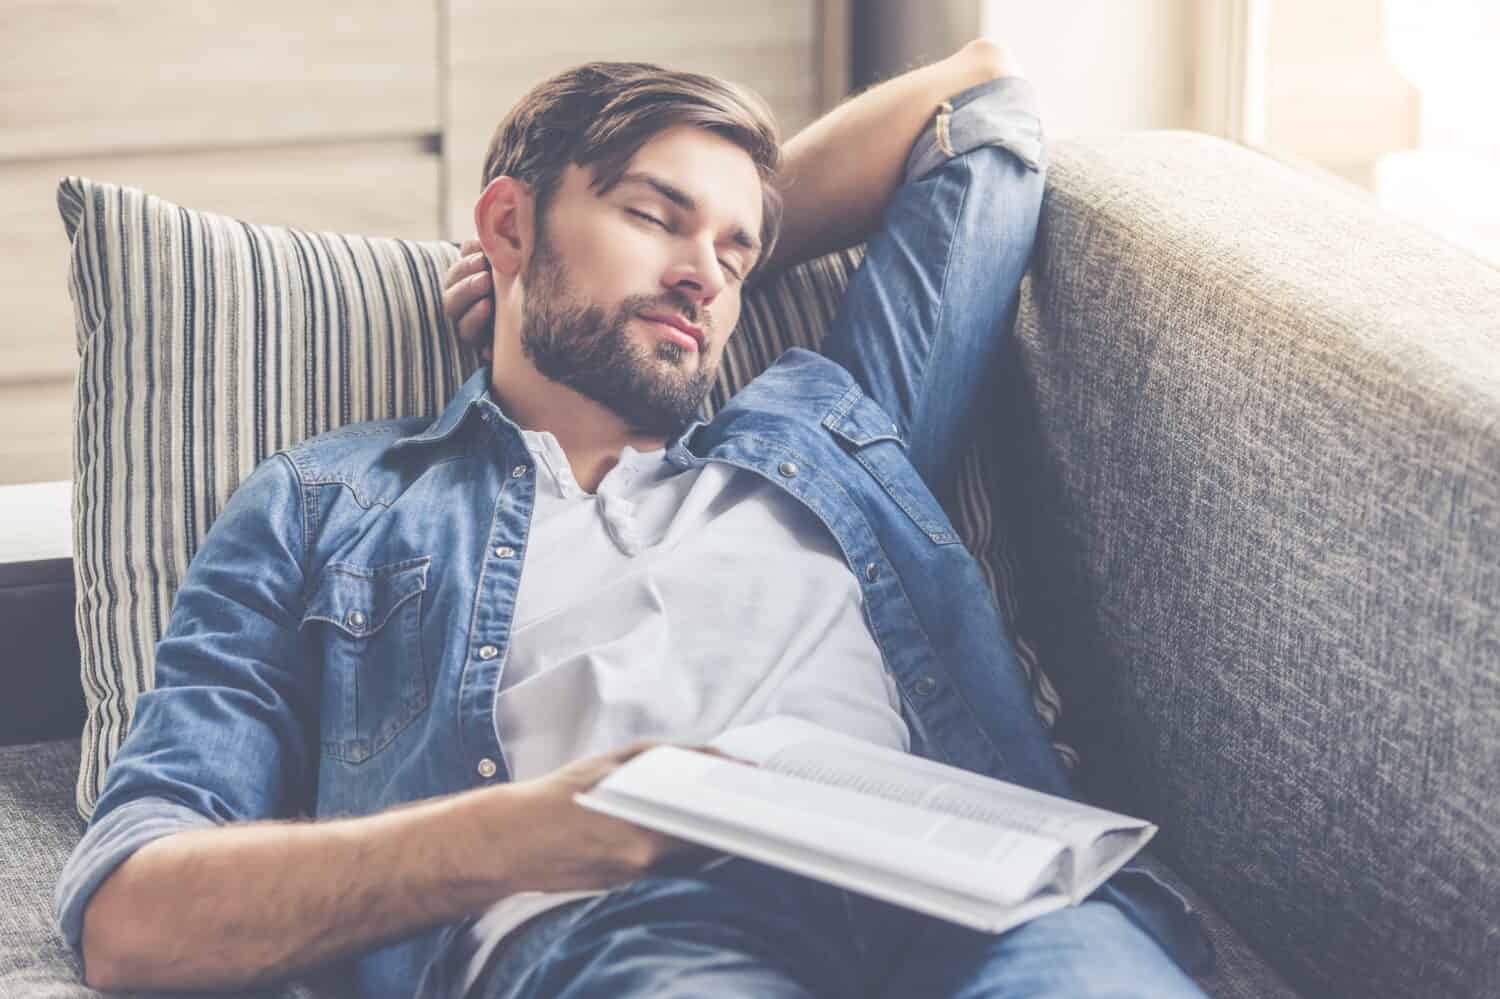 Handsome man is holding a book and napping while lying on couch at home